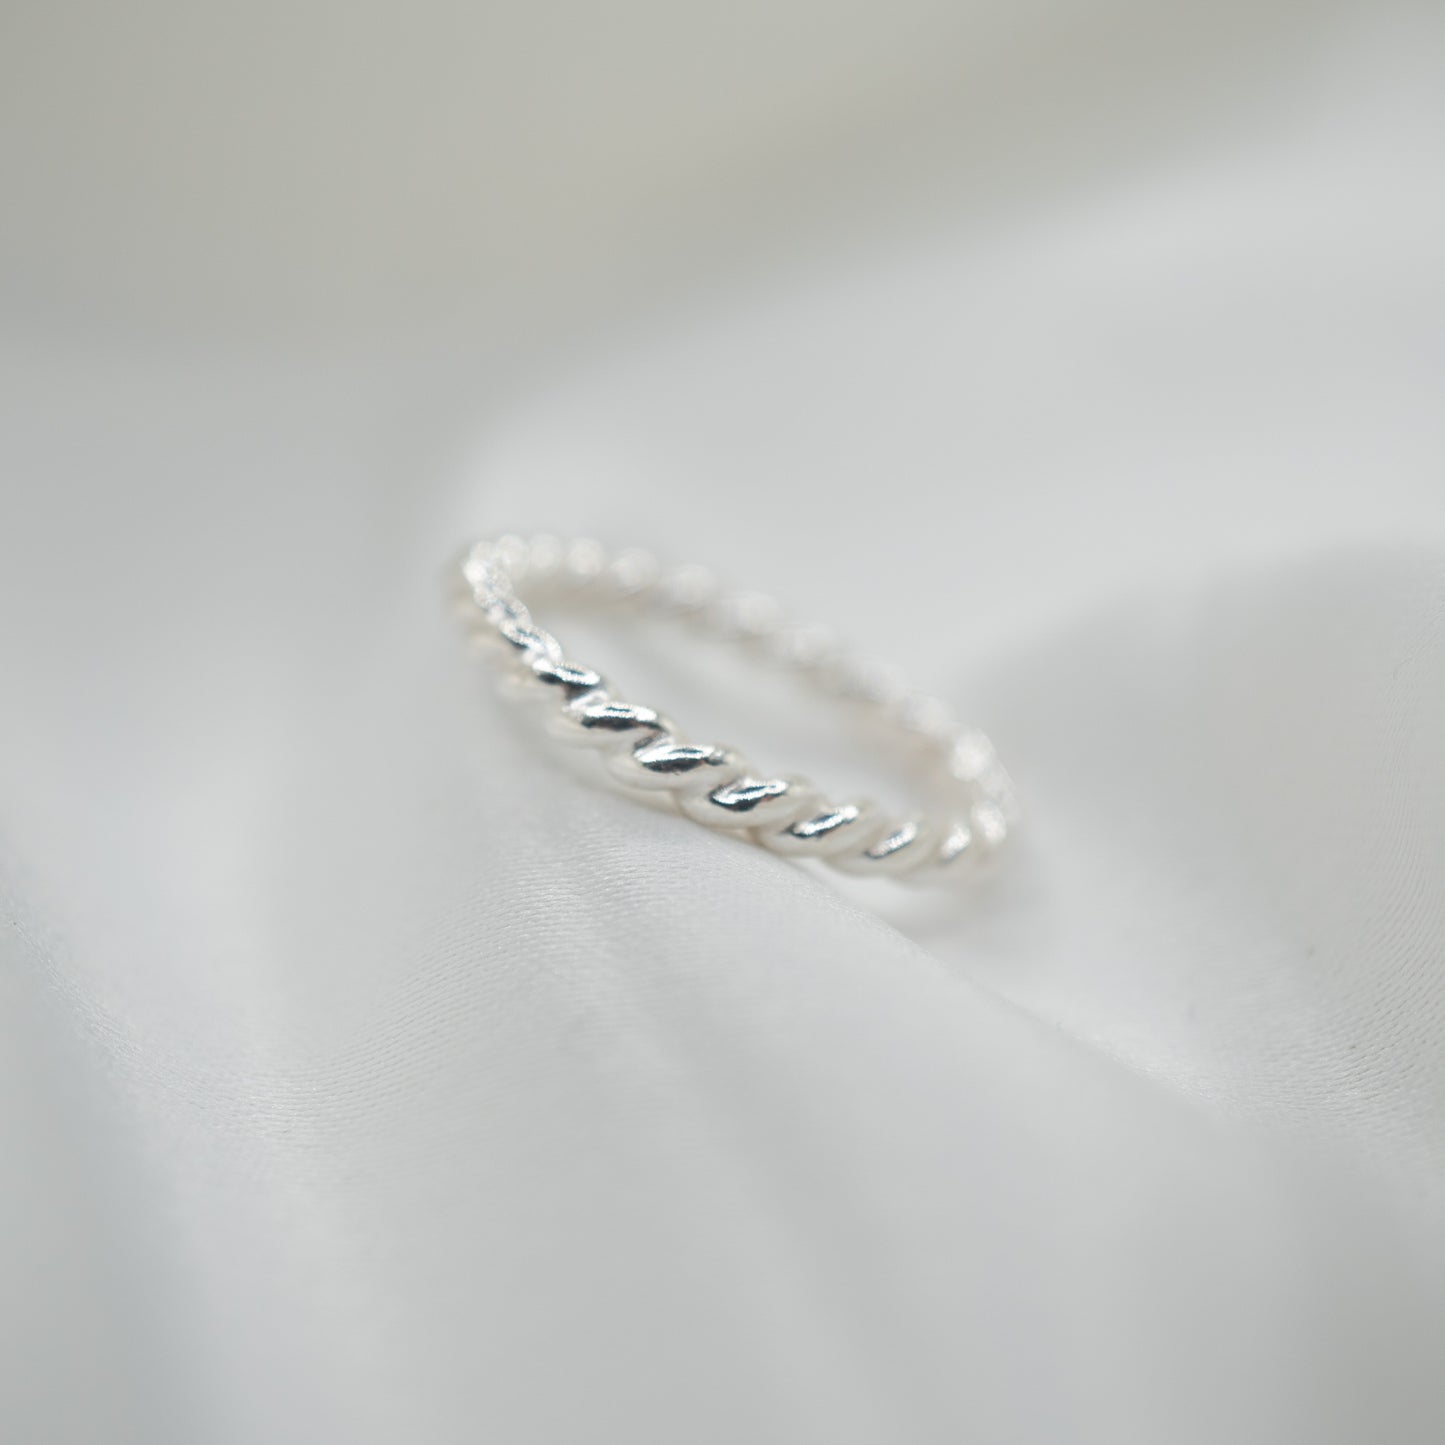 Sterling Silver Twisted Ring - shot on white - side view